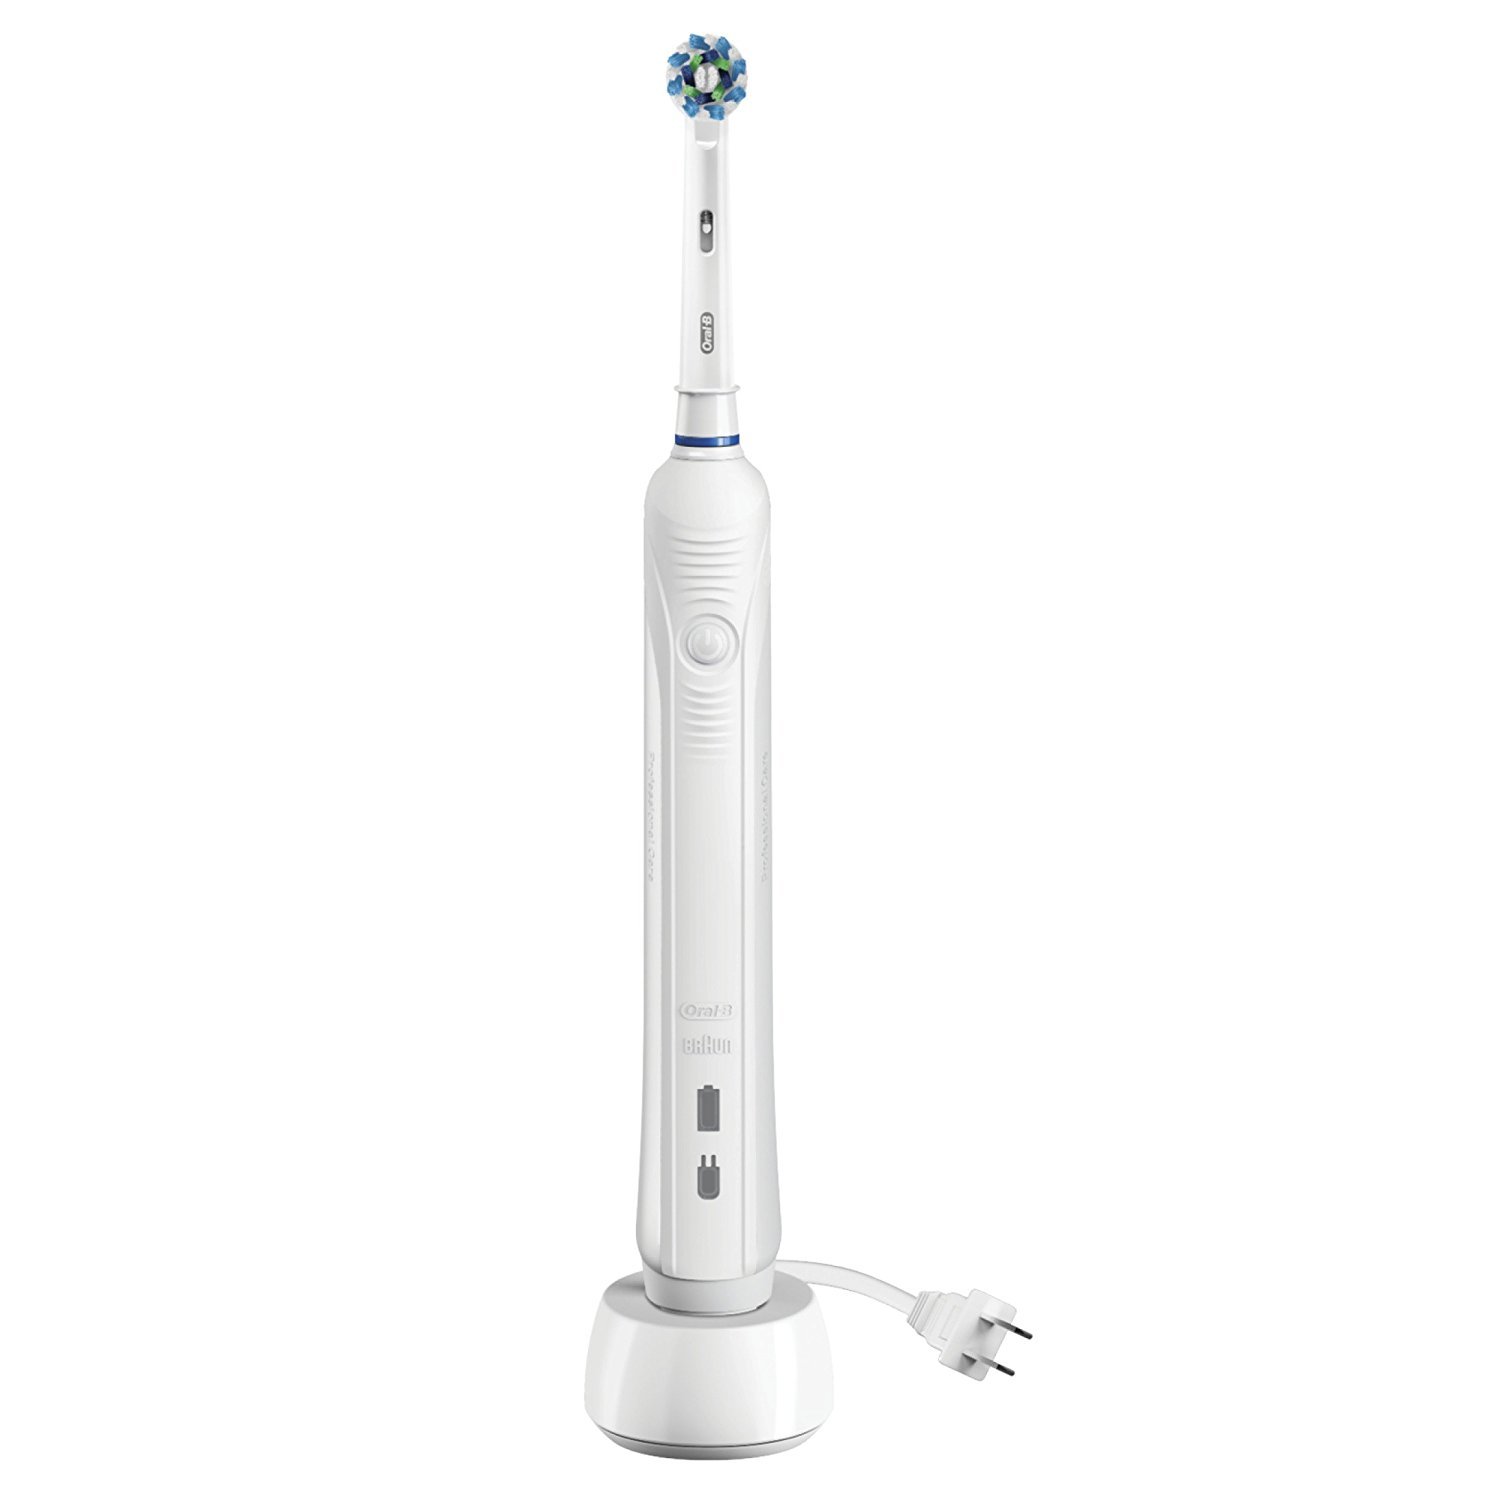 Power Rechargeable Toothbrush Oral-B White Pro 1000 Powered by Braun - $57.99